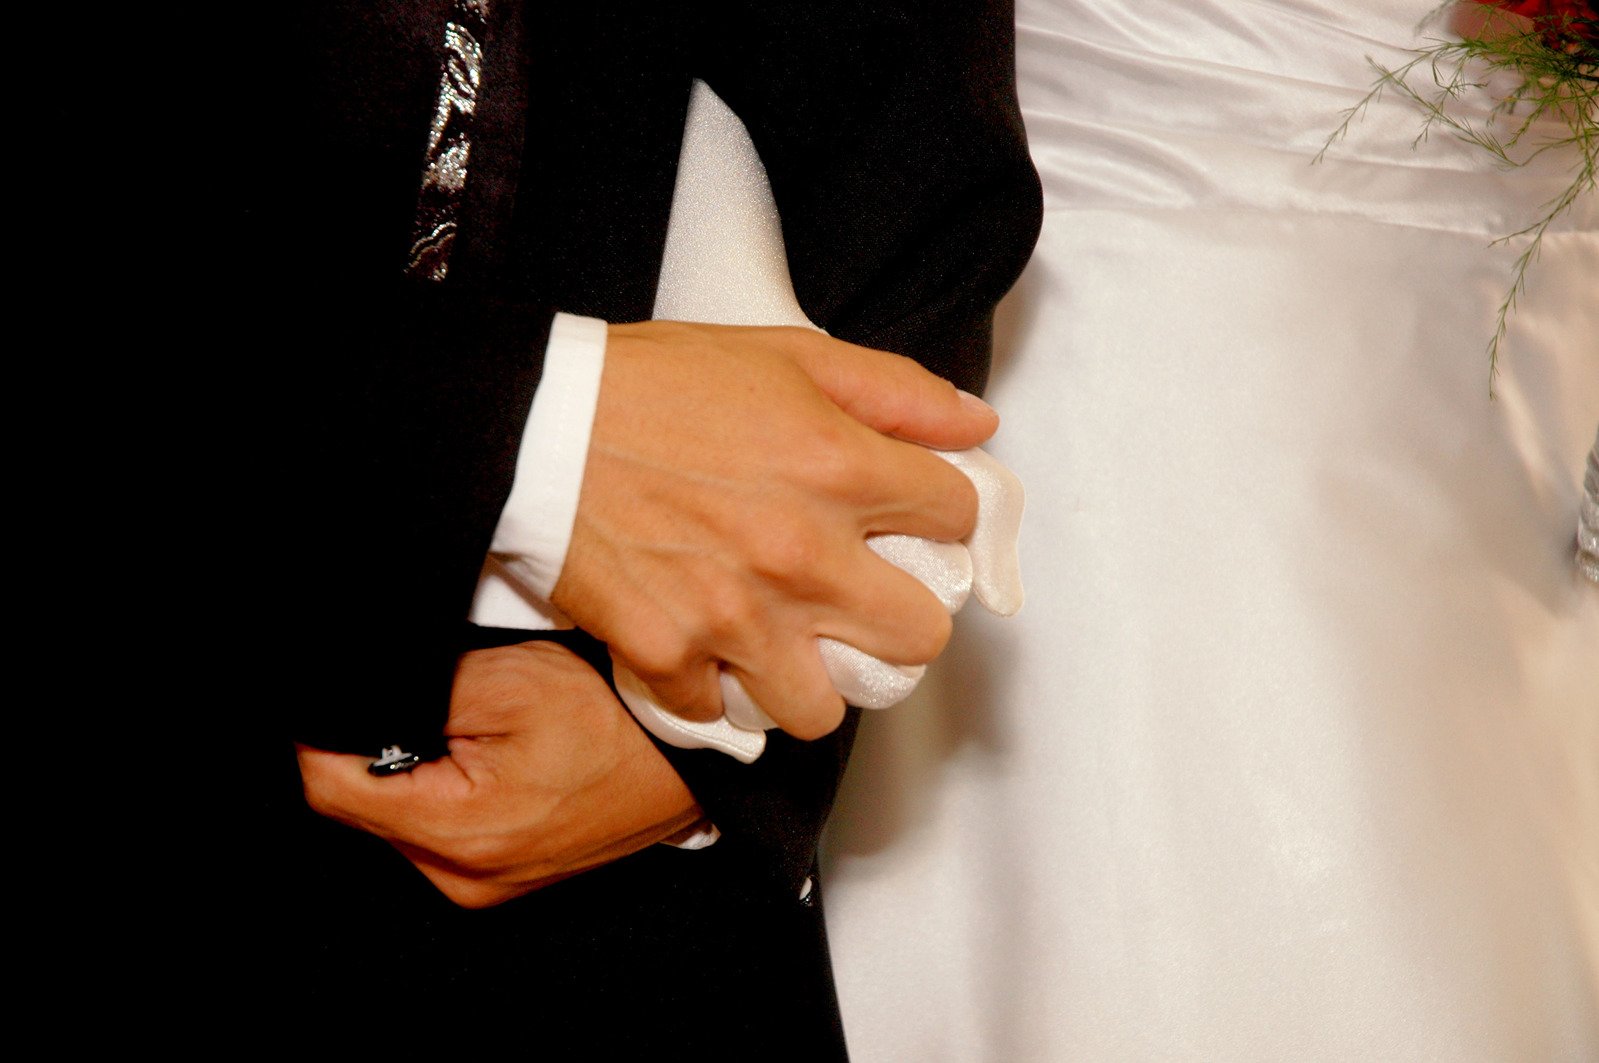 a person wearing a suit and tie holds their hands on their wedding band